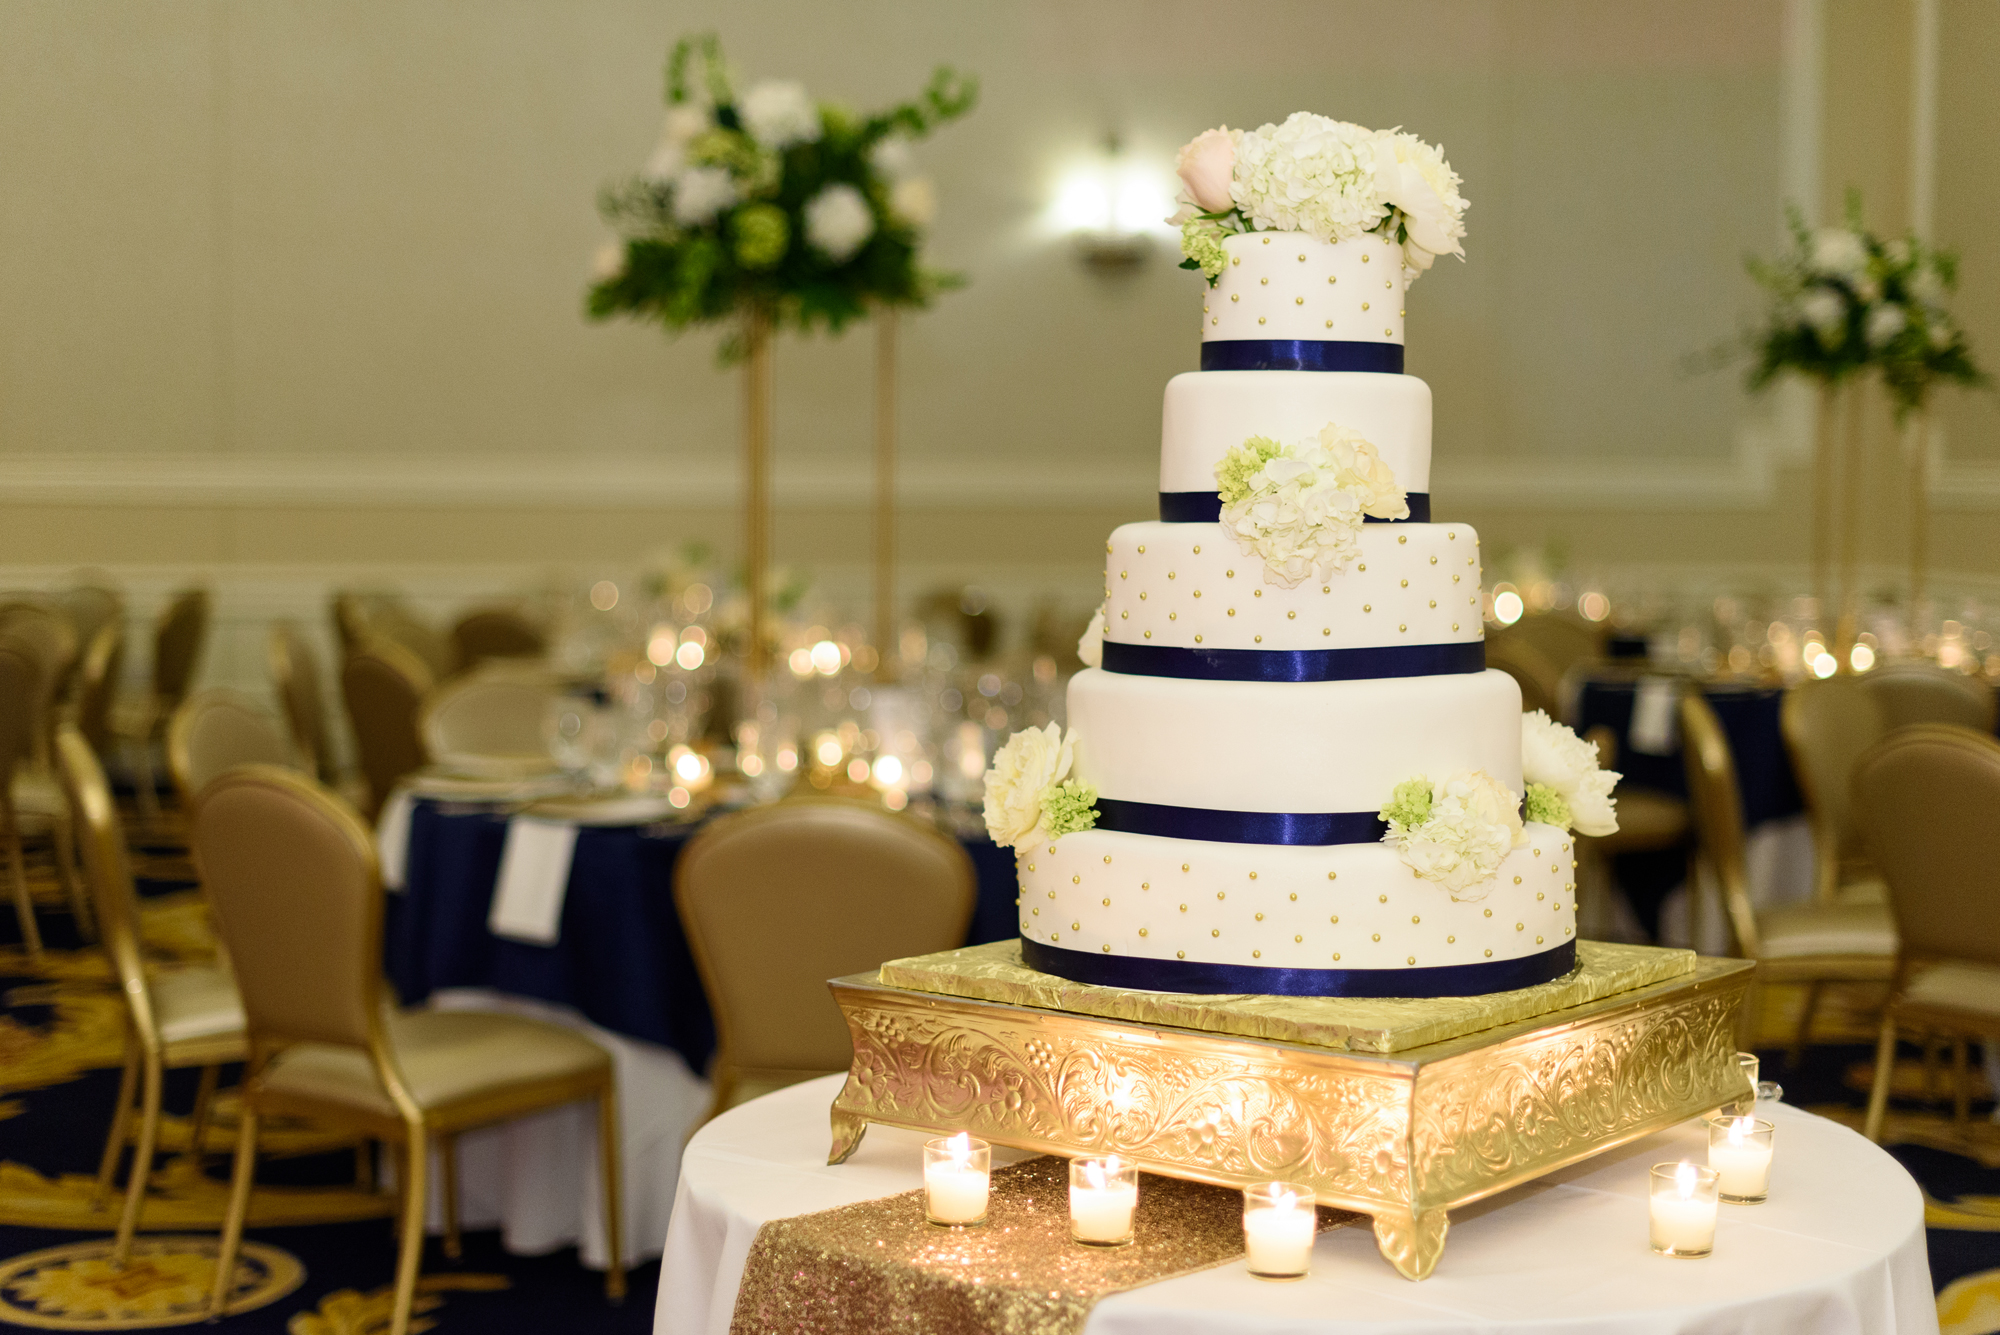 Timeless wedding cake with navy blue ribbon with a gold stand.